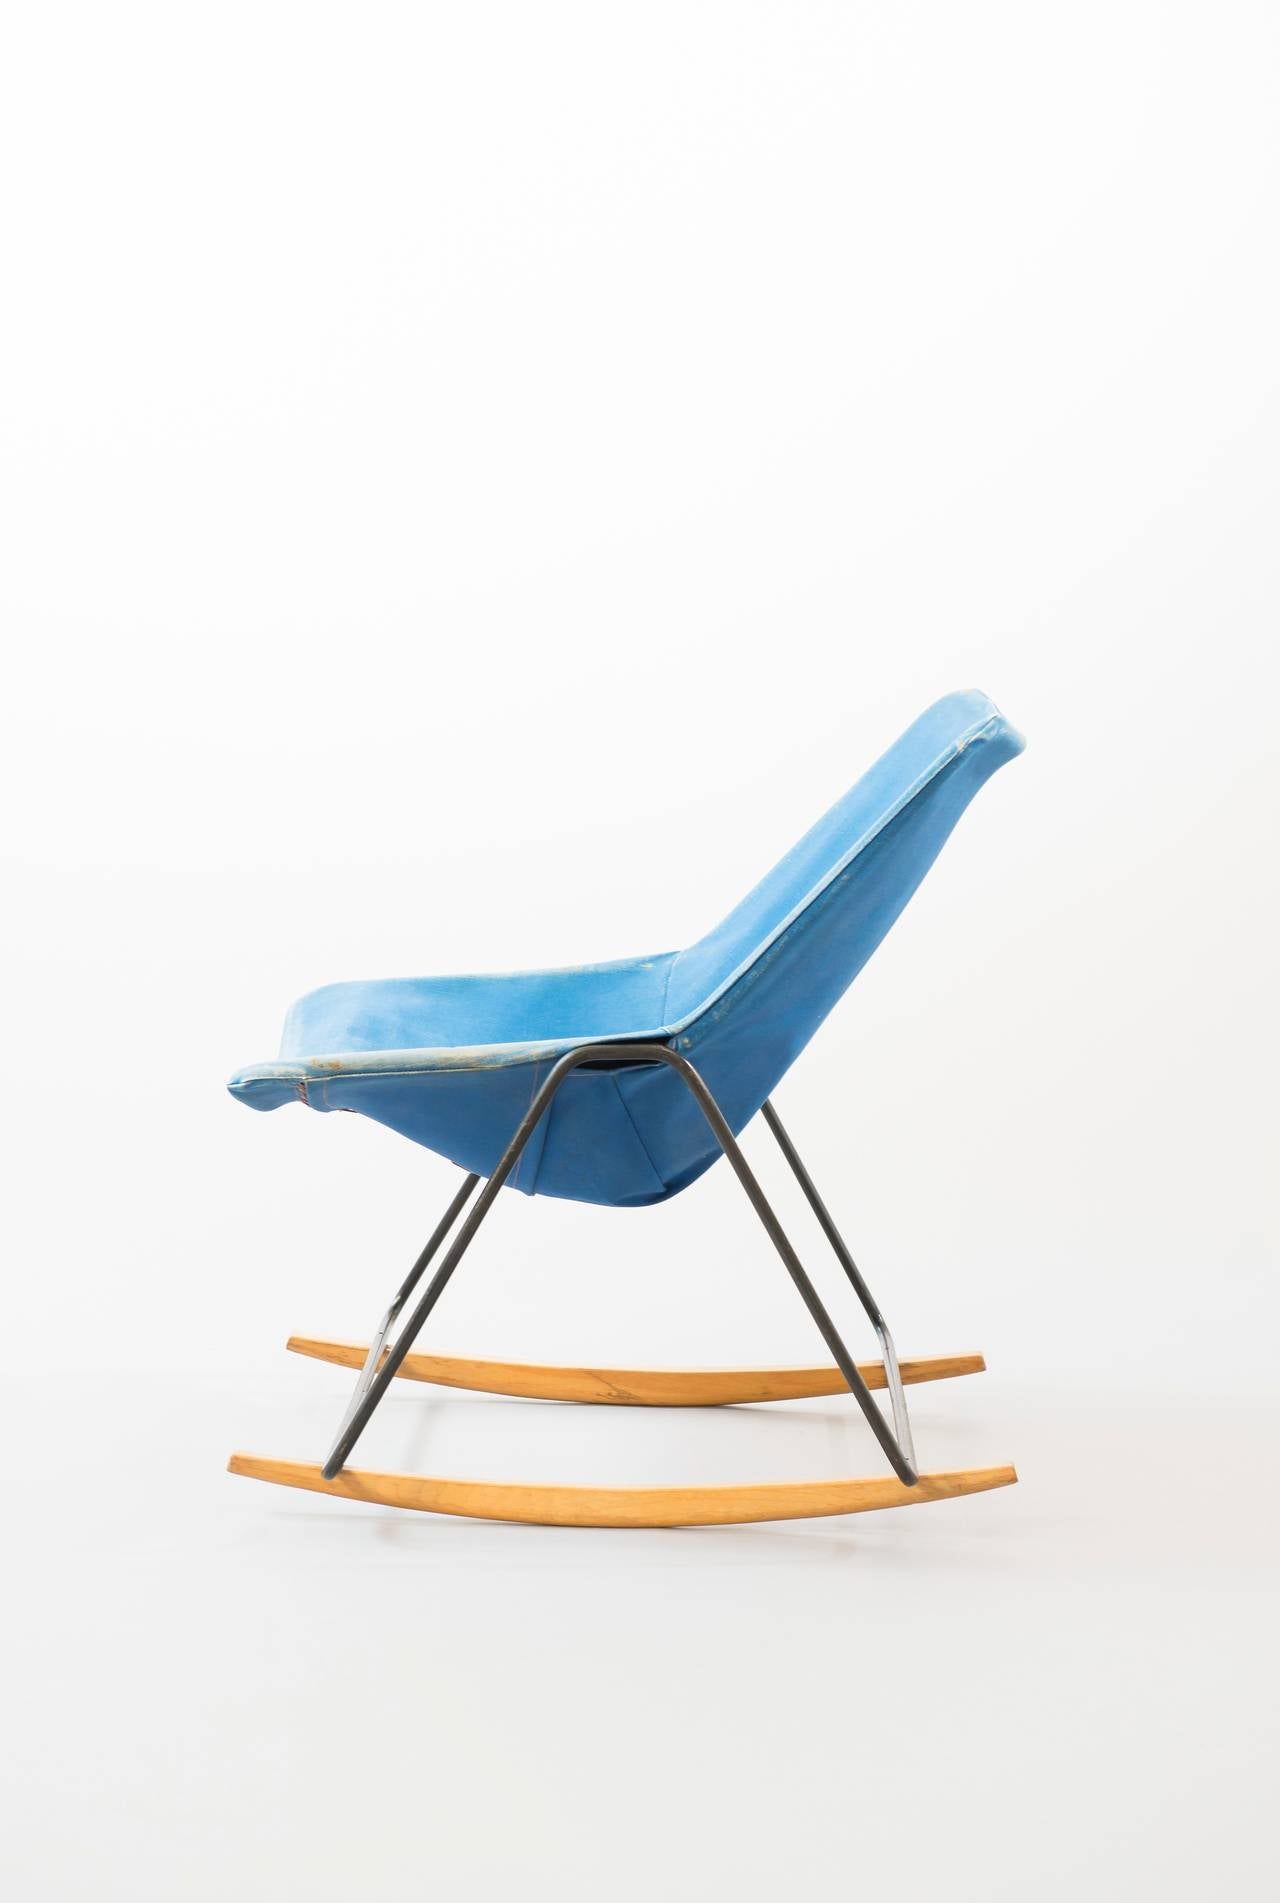 Mid-20th Century Rocking chair G1 by Pierre Guariche - Airborne edition - 1953 For Sale